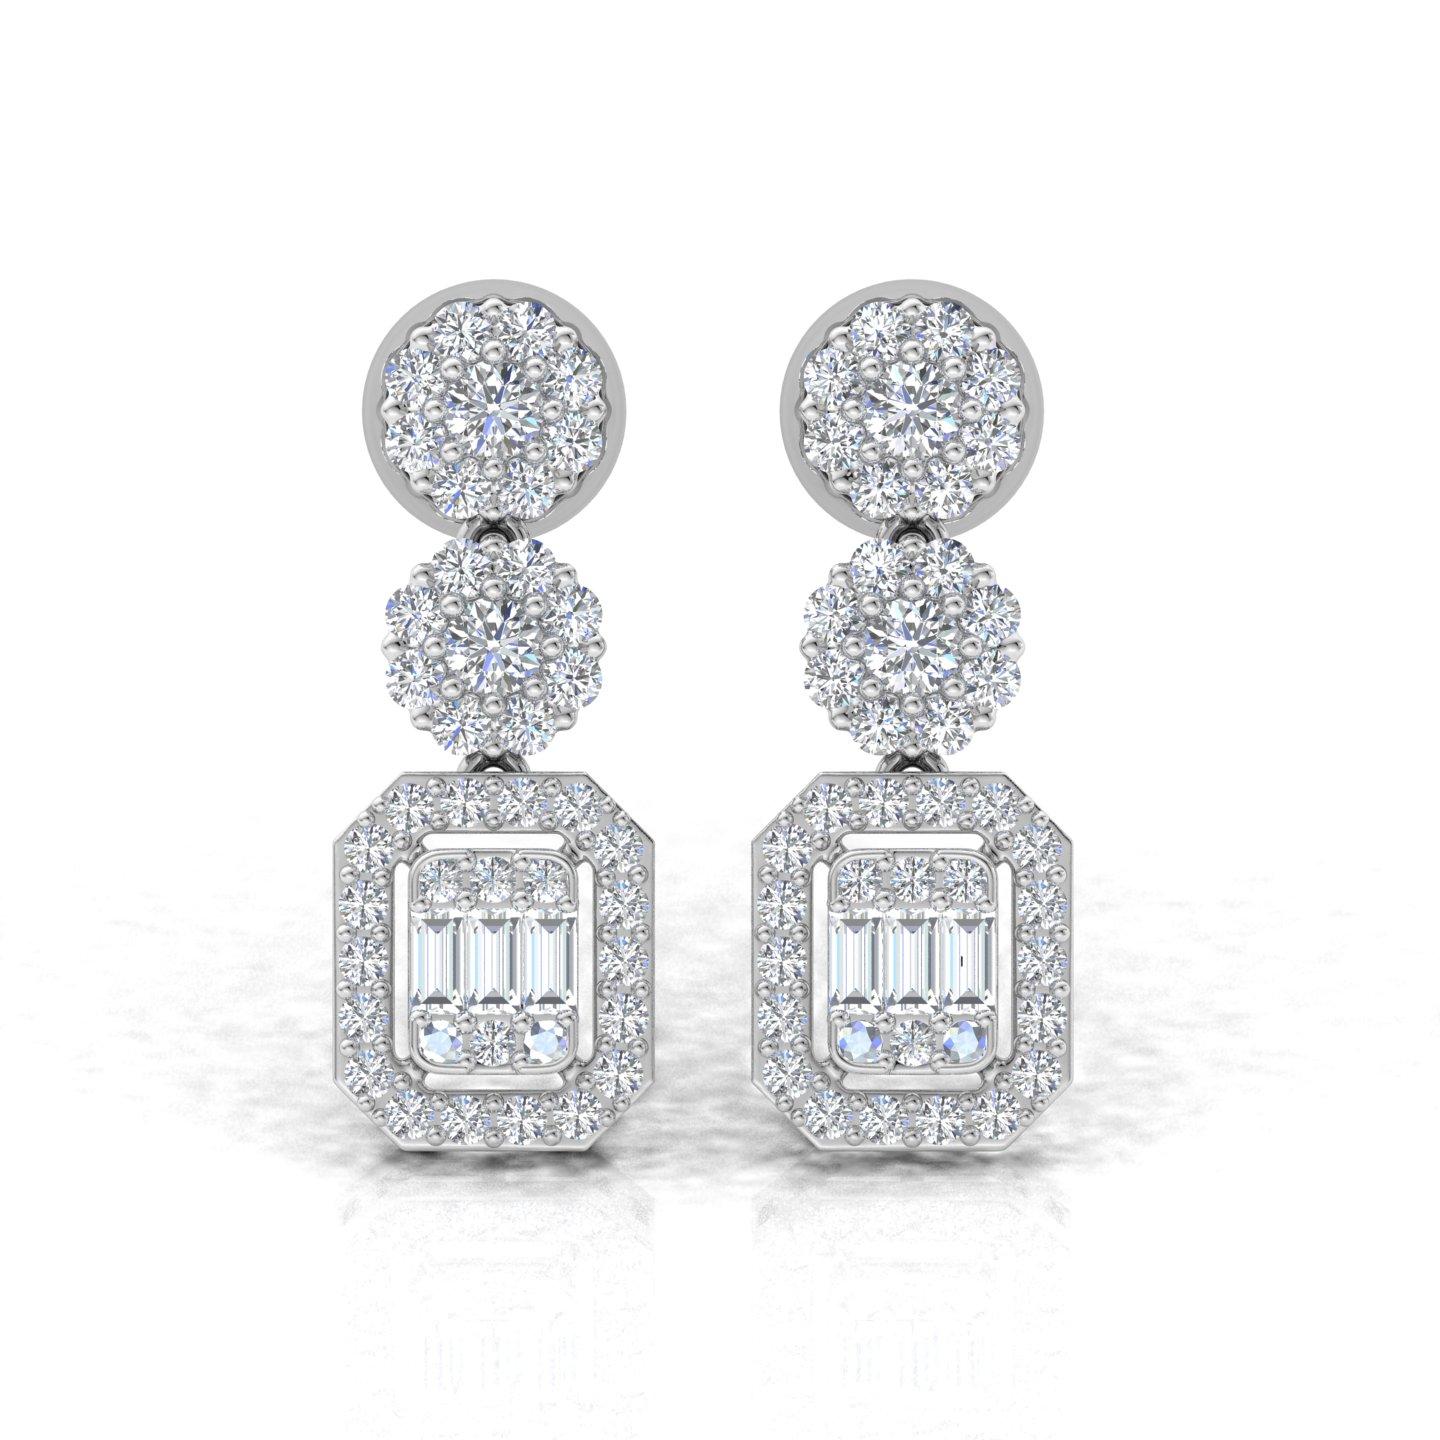 Item Code :- CN-21149
Gross Weight :- 4.28 gm
14k White Gold Weight :- 3.86 gm
Diamond Weight :- 2.10 Carat  ( AVERAGE DIAMOND CLARITY SI1-SI2 & COLOR H-I )
Earrings Size :- 23.92 x 9.05 mm approx.
✦ Sizing
.....................
We can adjust most